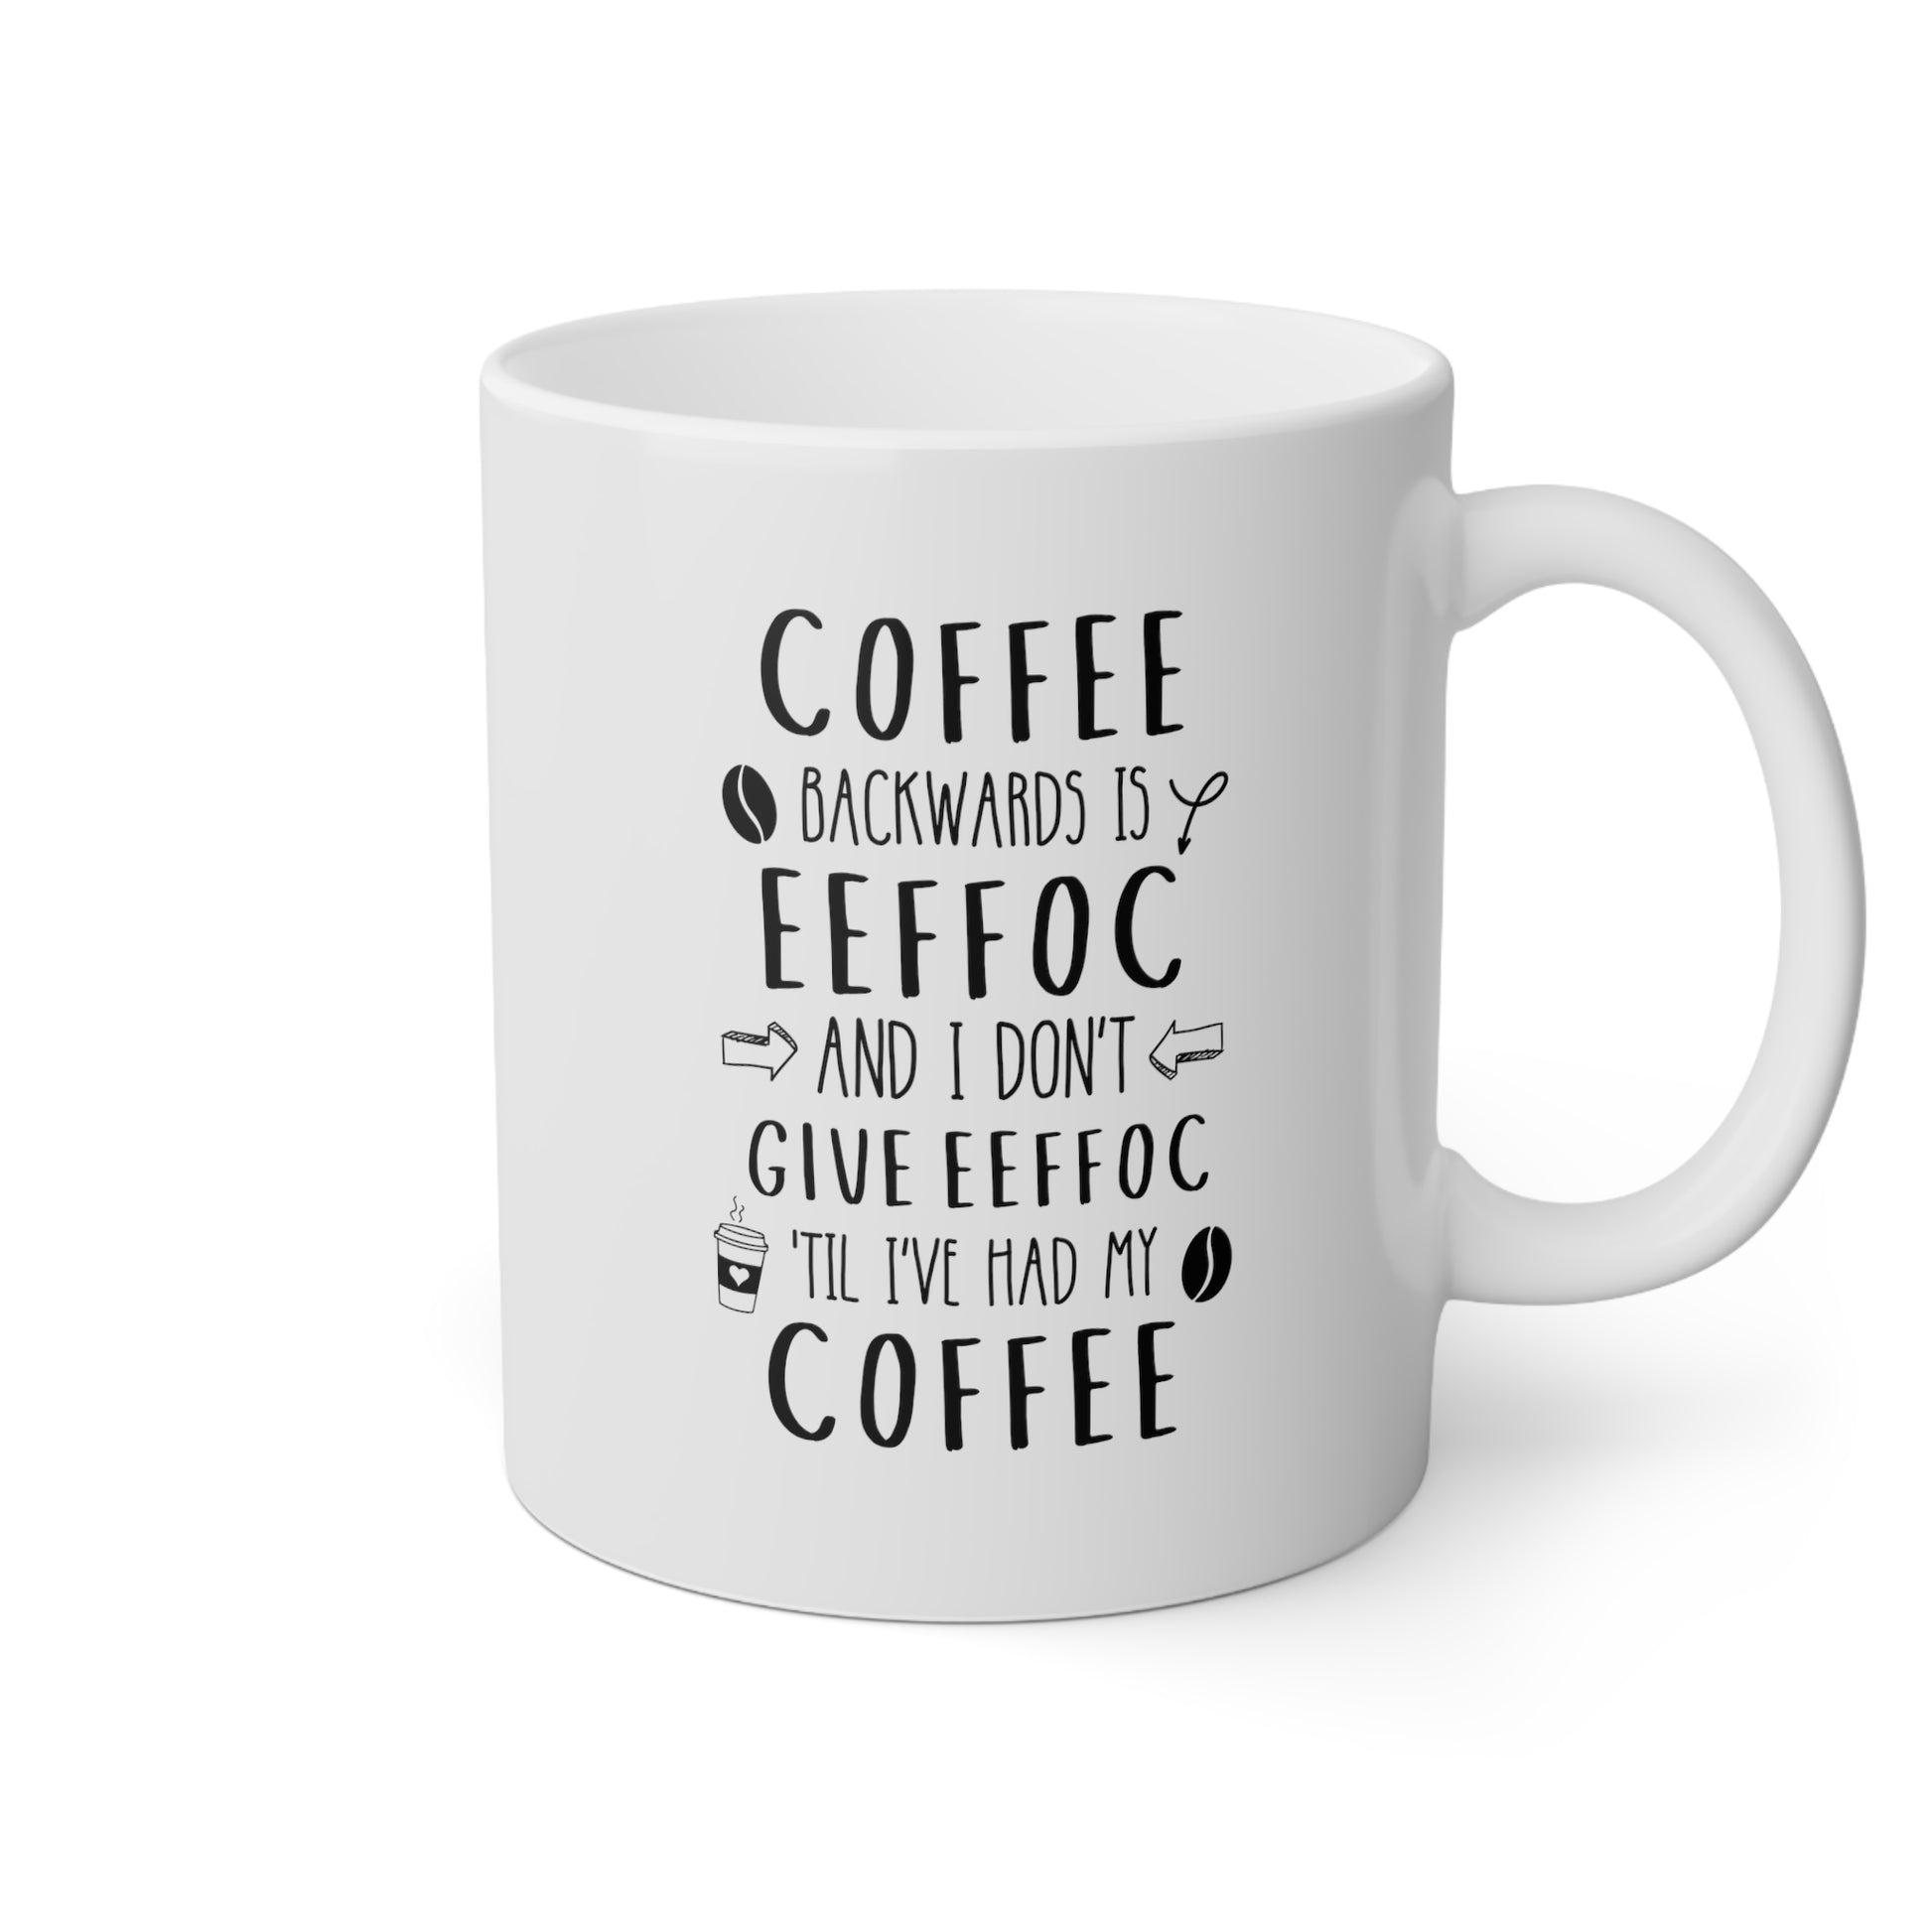 Coffee Backwards Is Eeffoc And I Dont Give Eeffoc Til Ive Had My Coffee 11oz white funny large coffee mug morning adult humour office waveywares wavey wares wavywares wavy wares